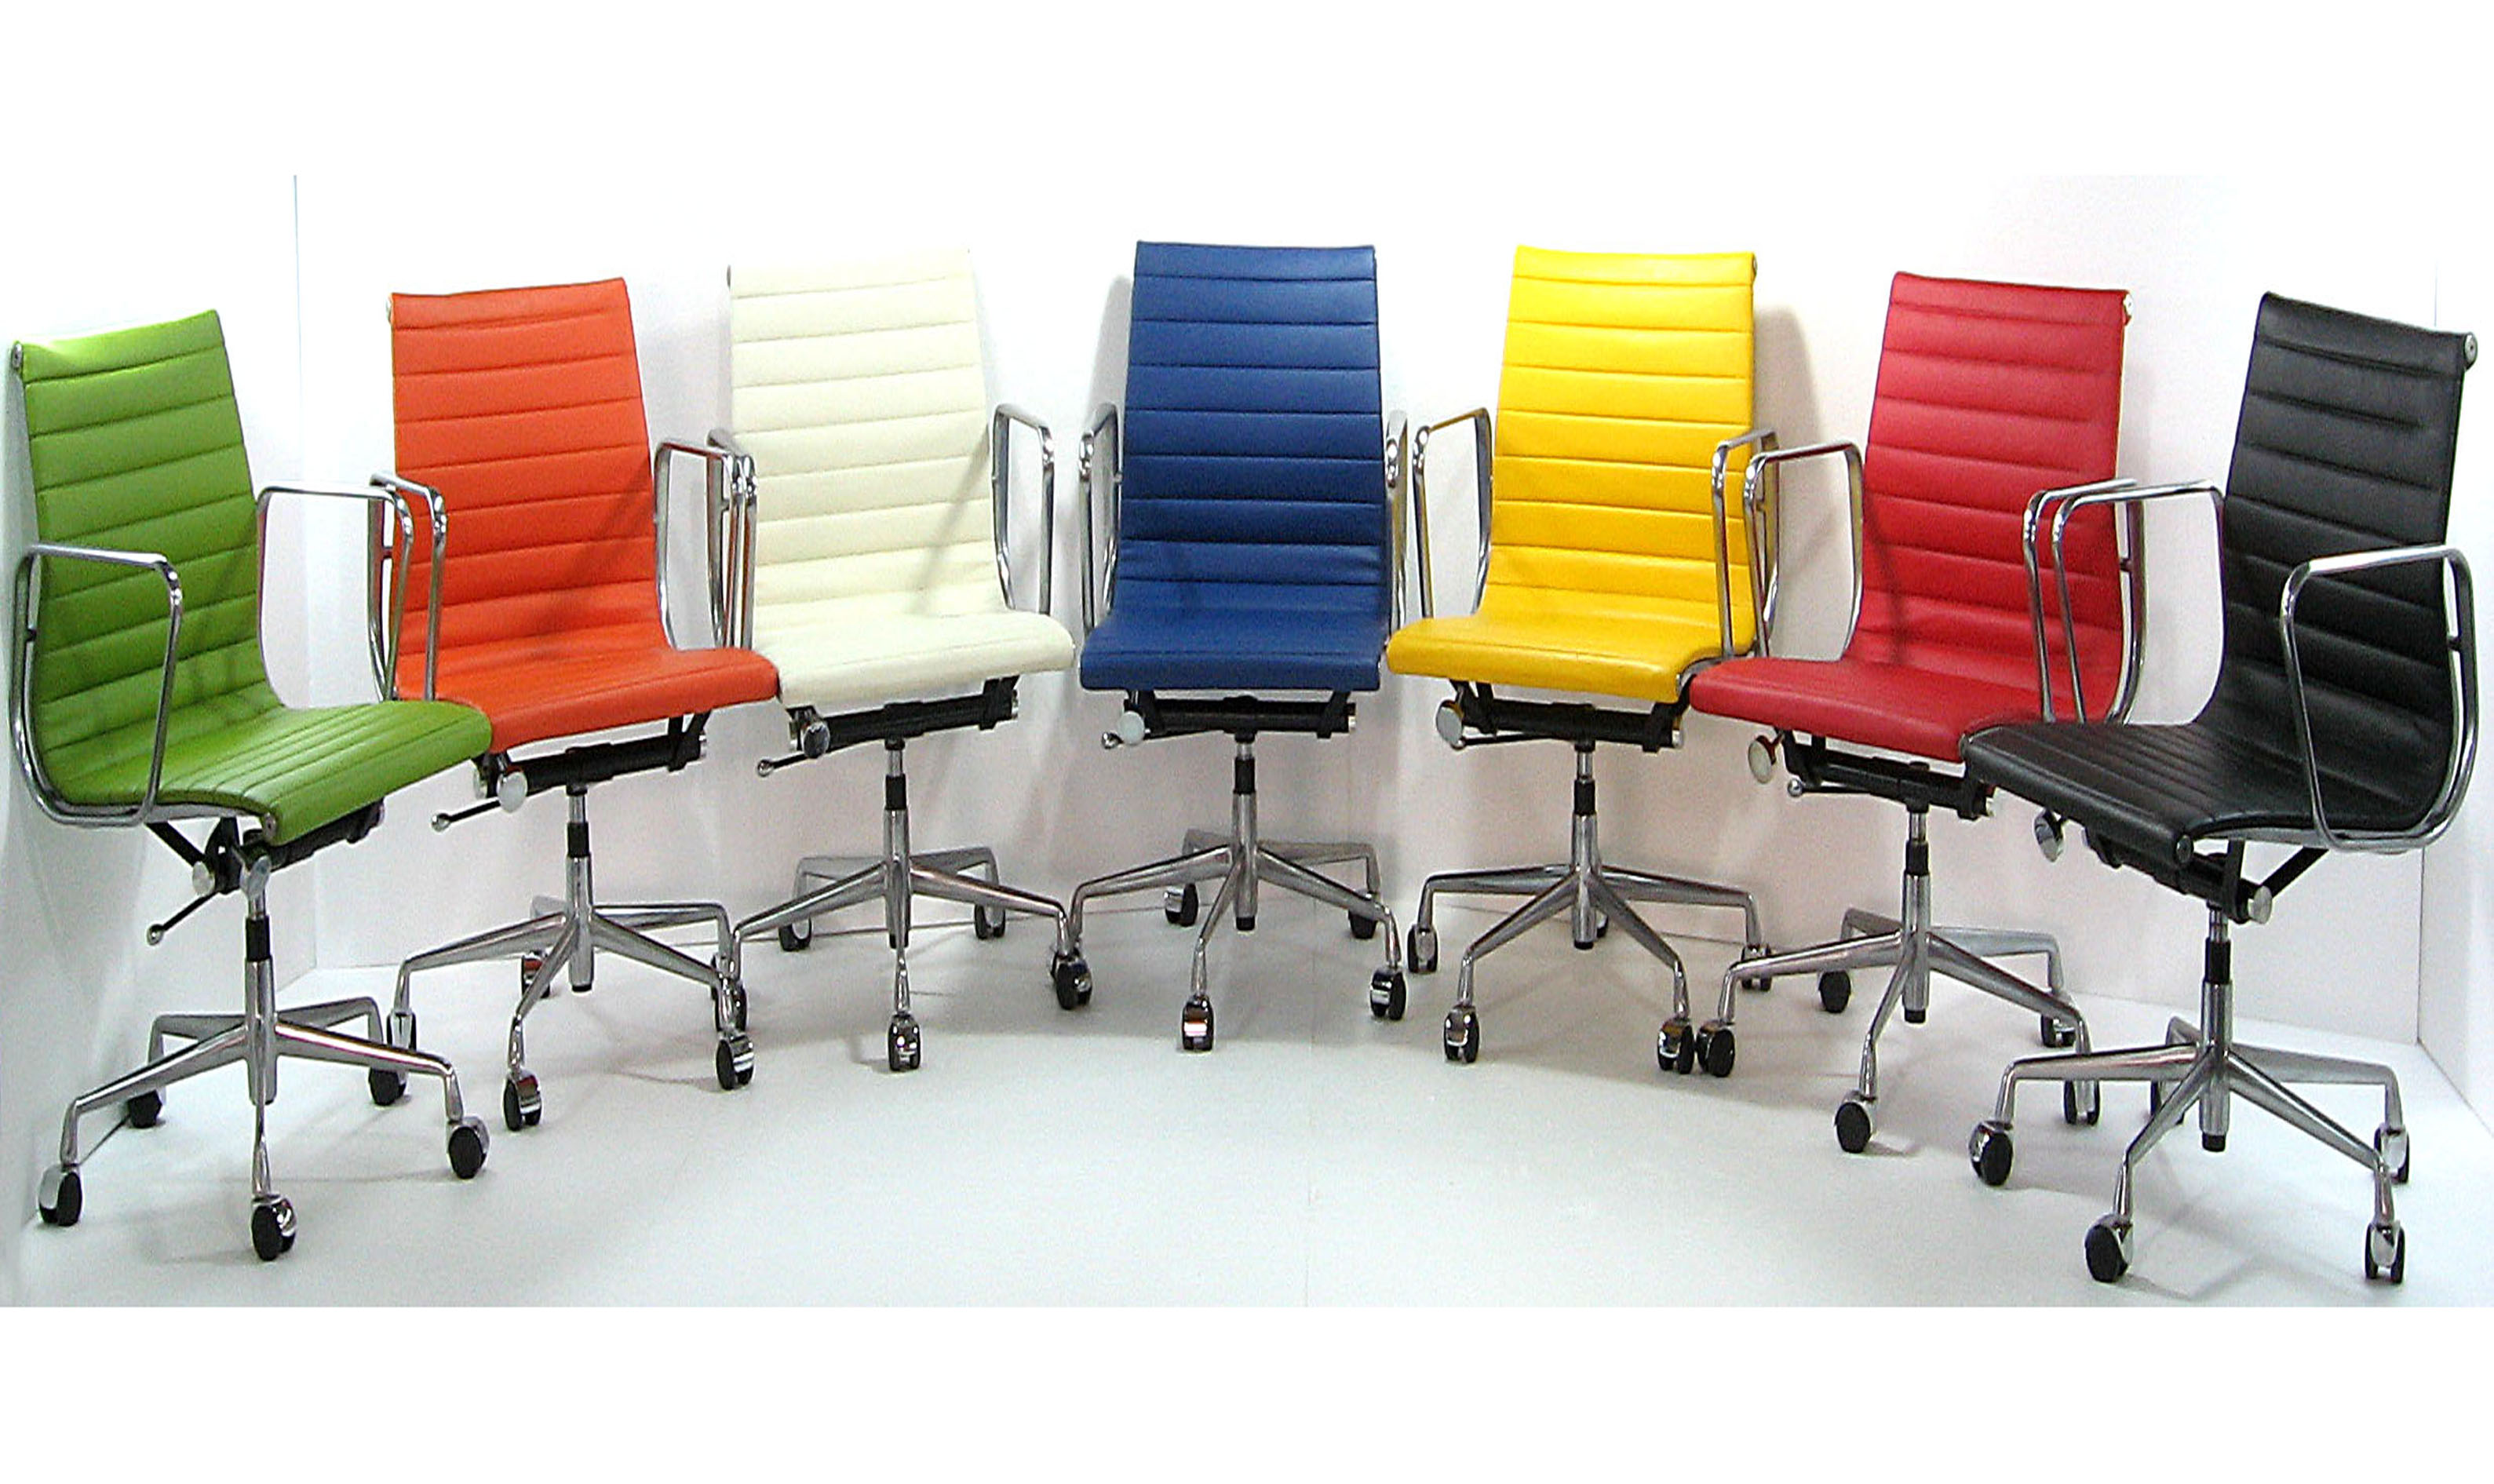 Eames Office chair